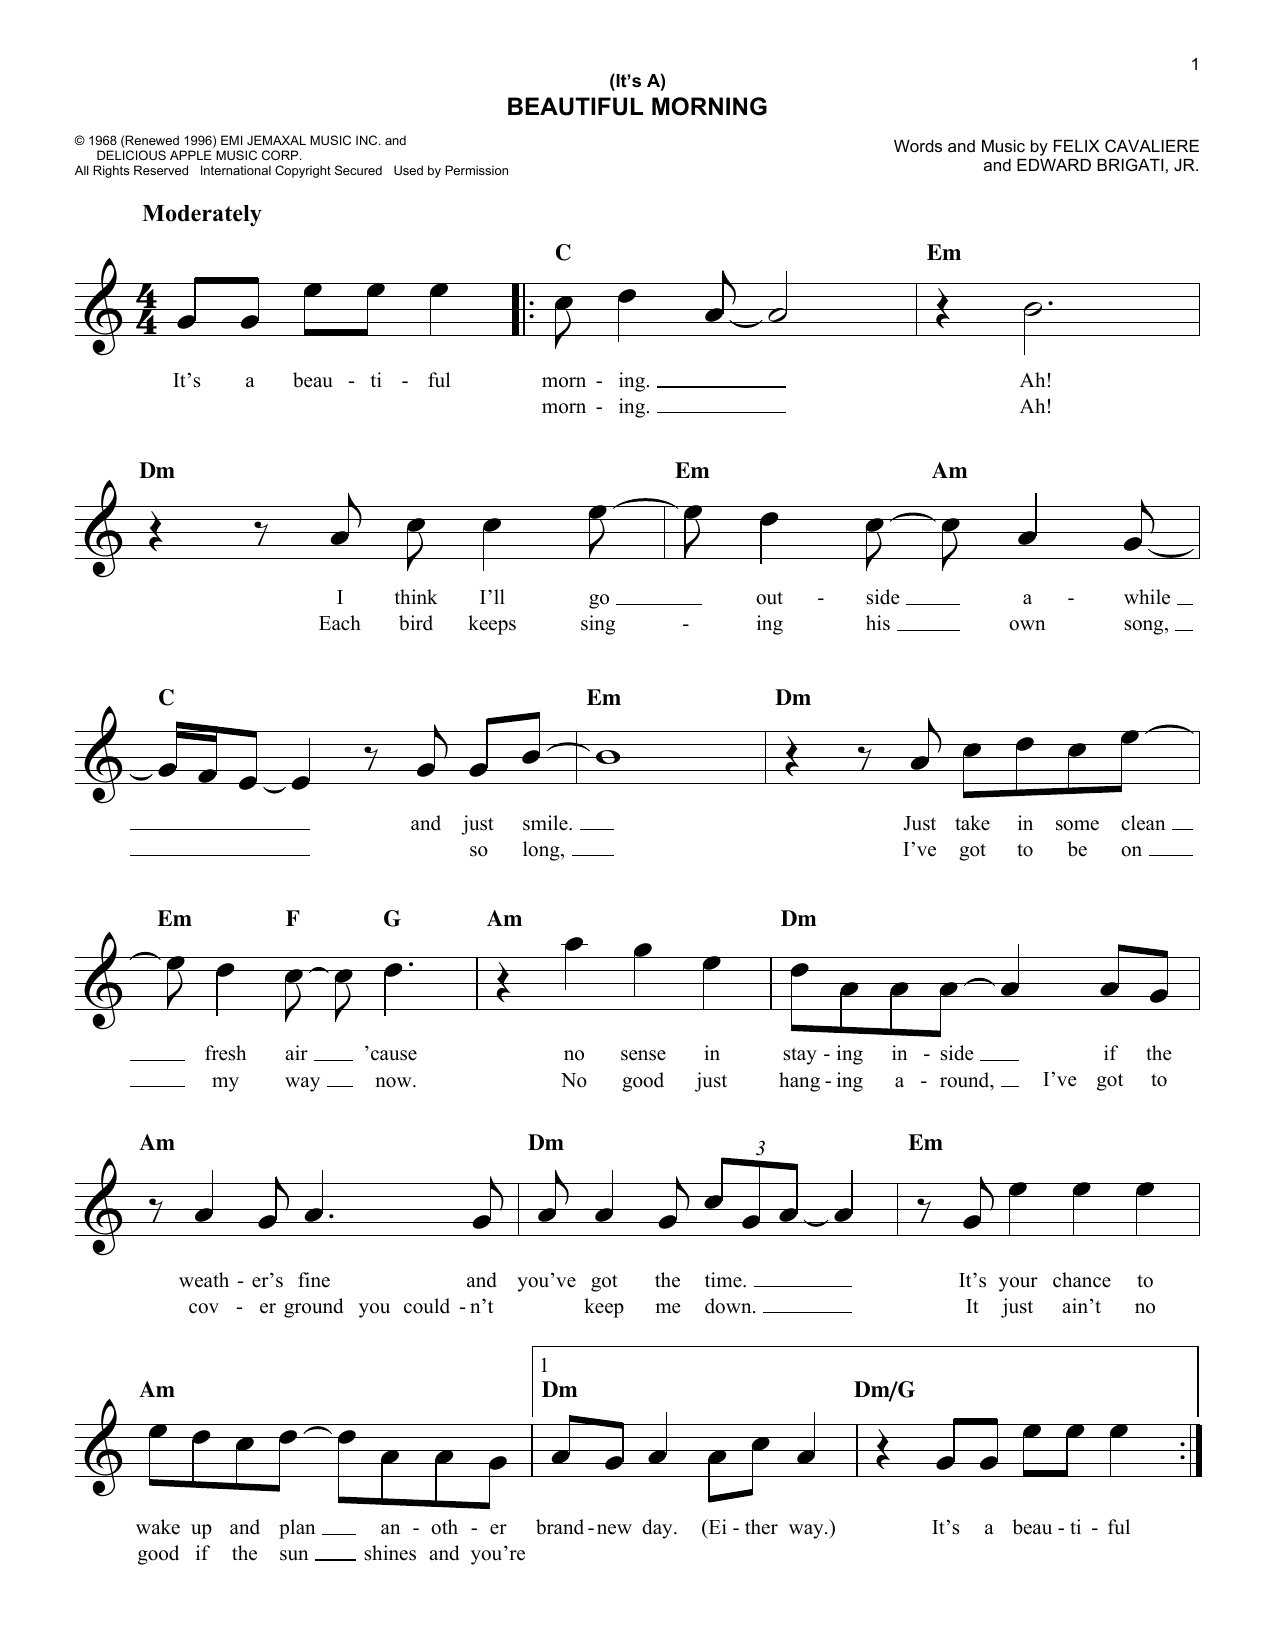 Download The Rascals (It's A) Beautiful Morning Sheet Music